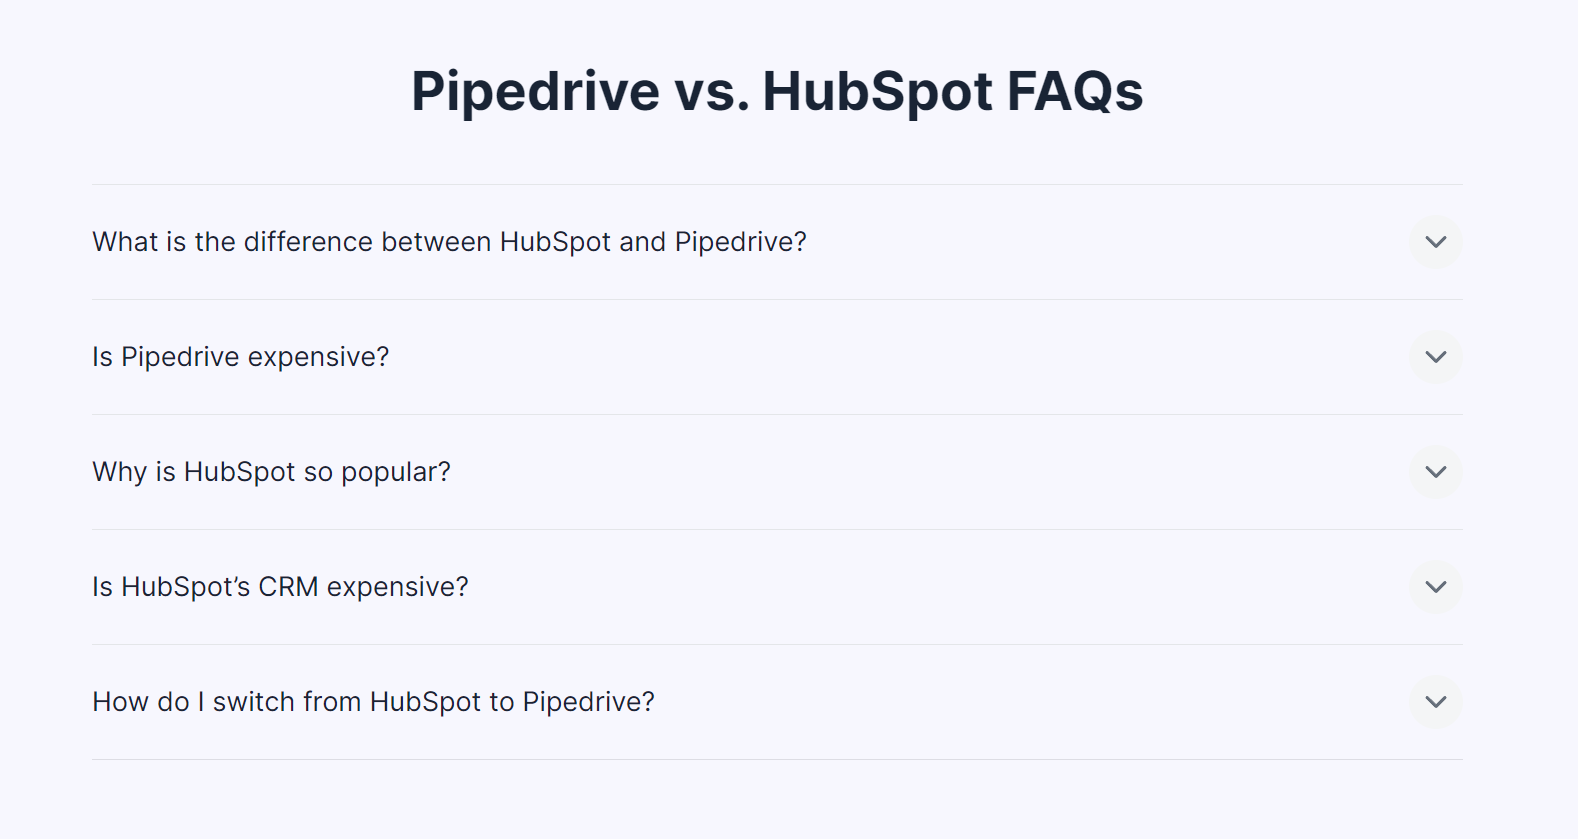 Pipedrive includes an FAQ section covering common questions about how its main competitor HubSpot